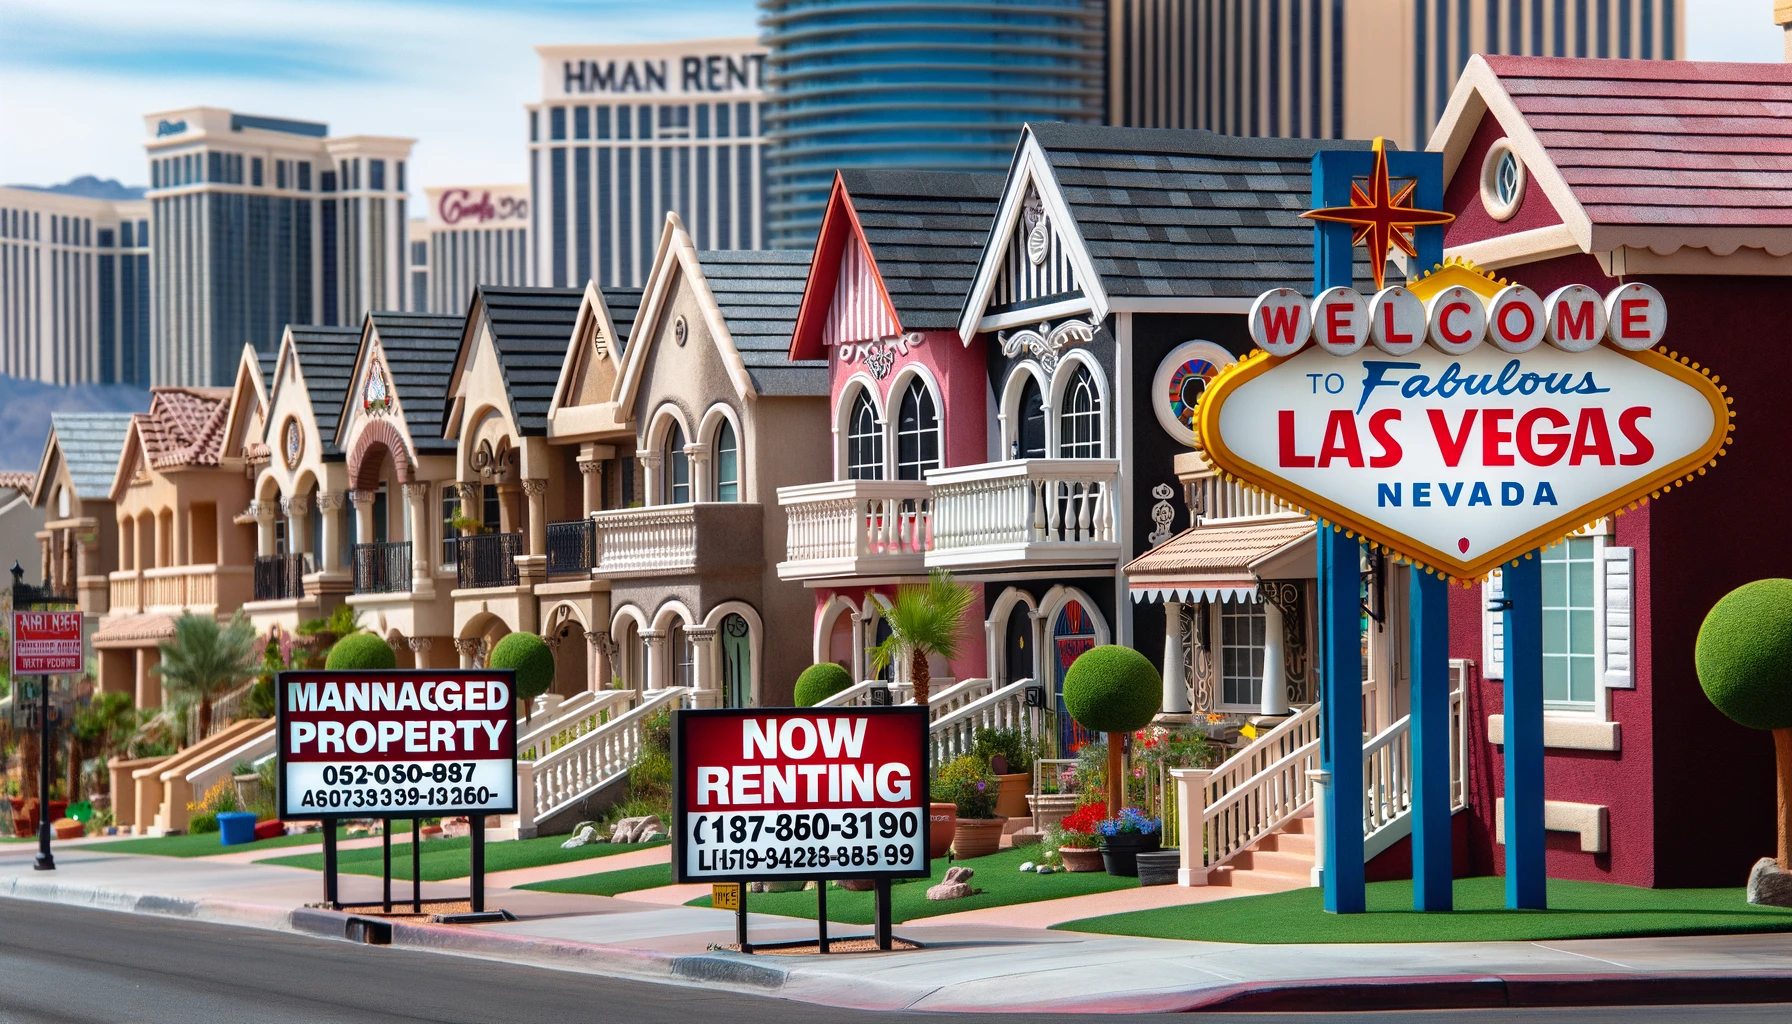 Busy Las Vegas street with real estate signs and billboards showcasing properties for rent or sale